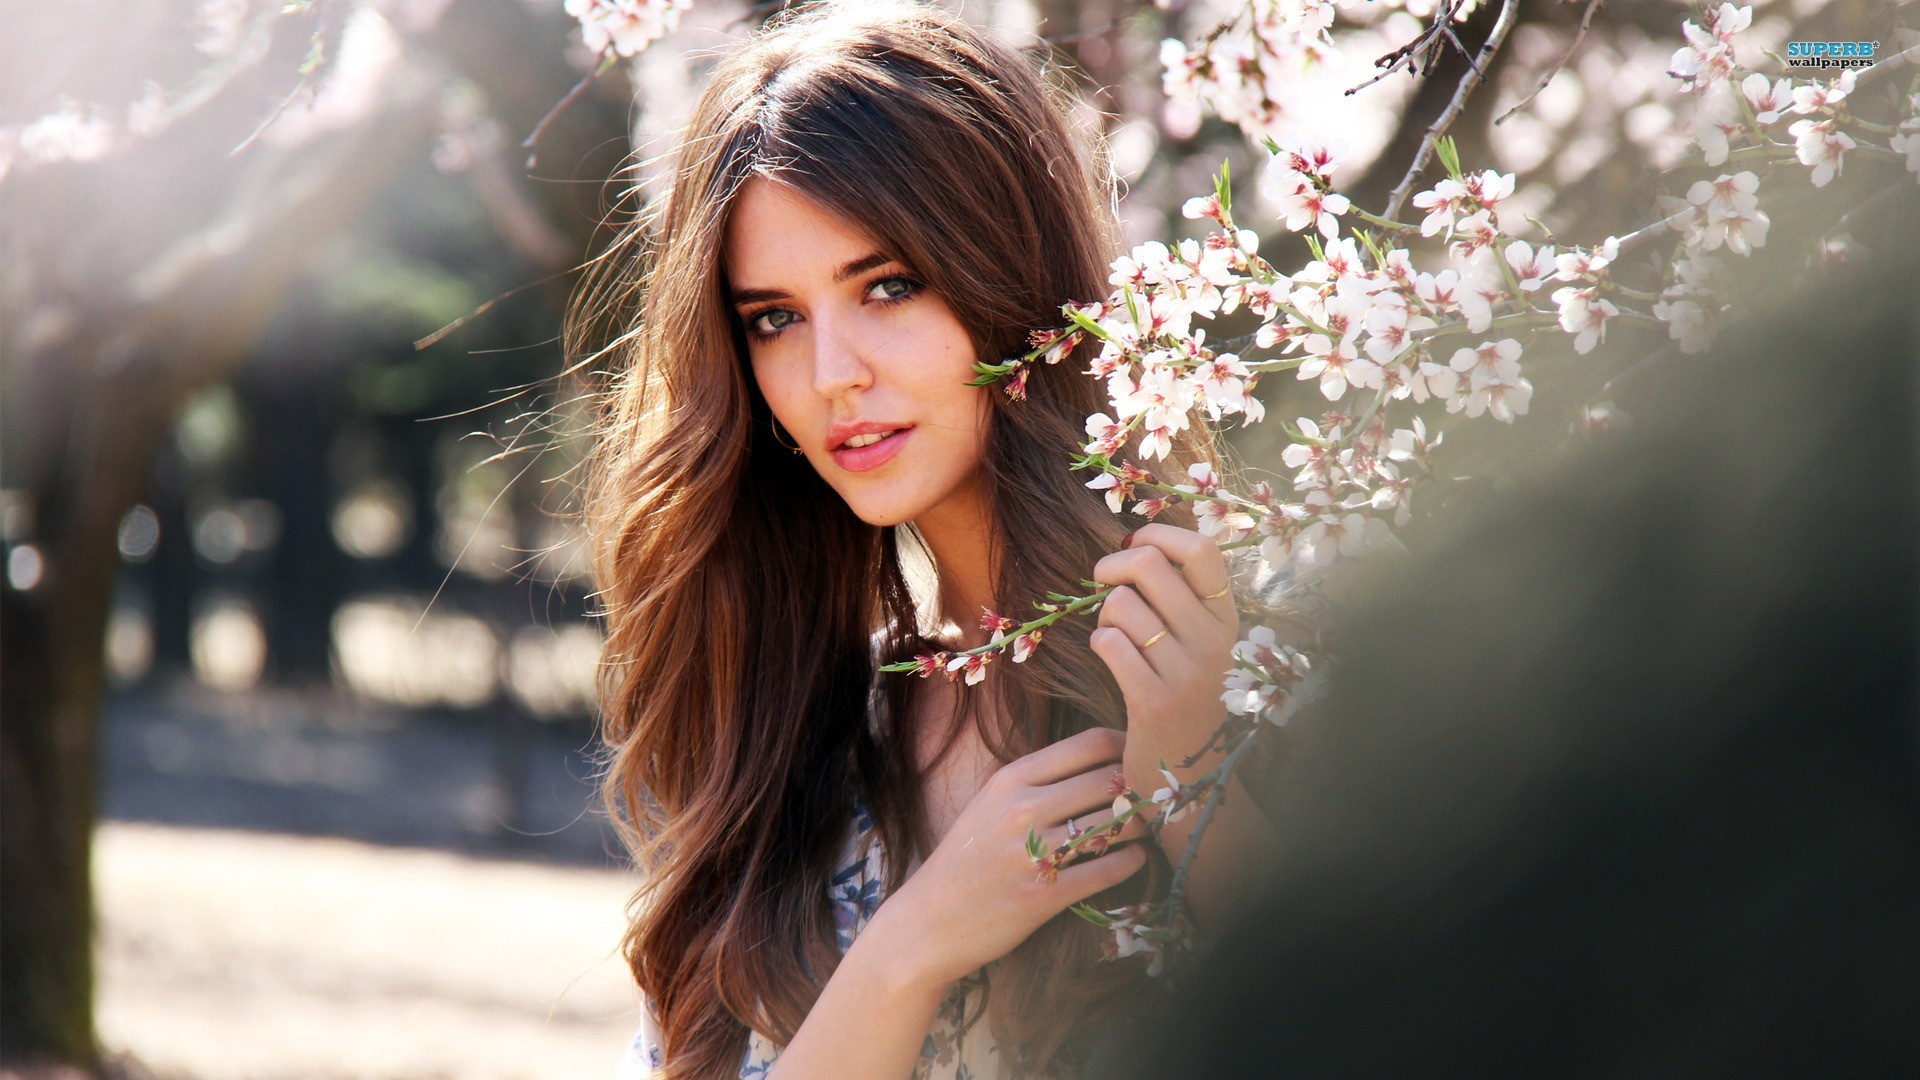 People 1920x1080 Clara Alonso women brunette long hair face nature water looking at viewer flowers plants women outdoors outdoors Spanish women